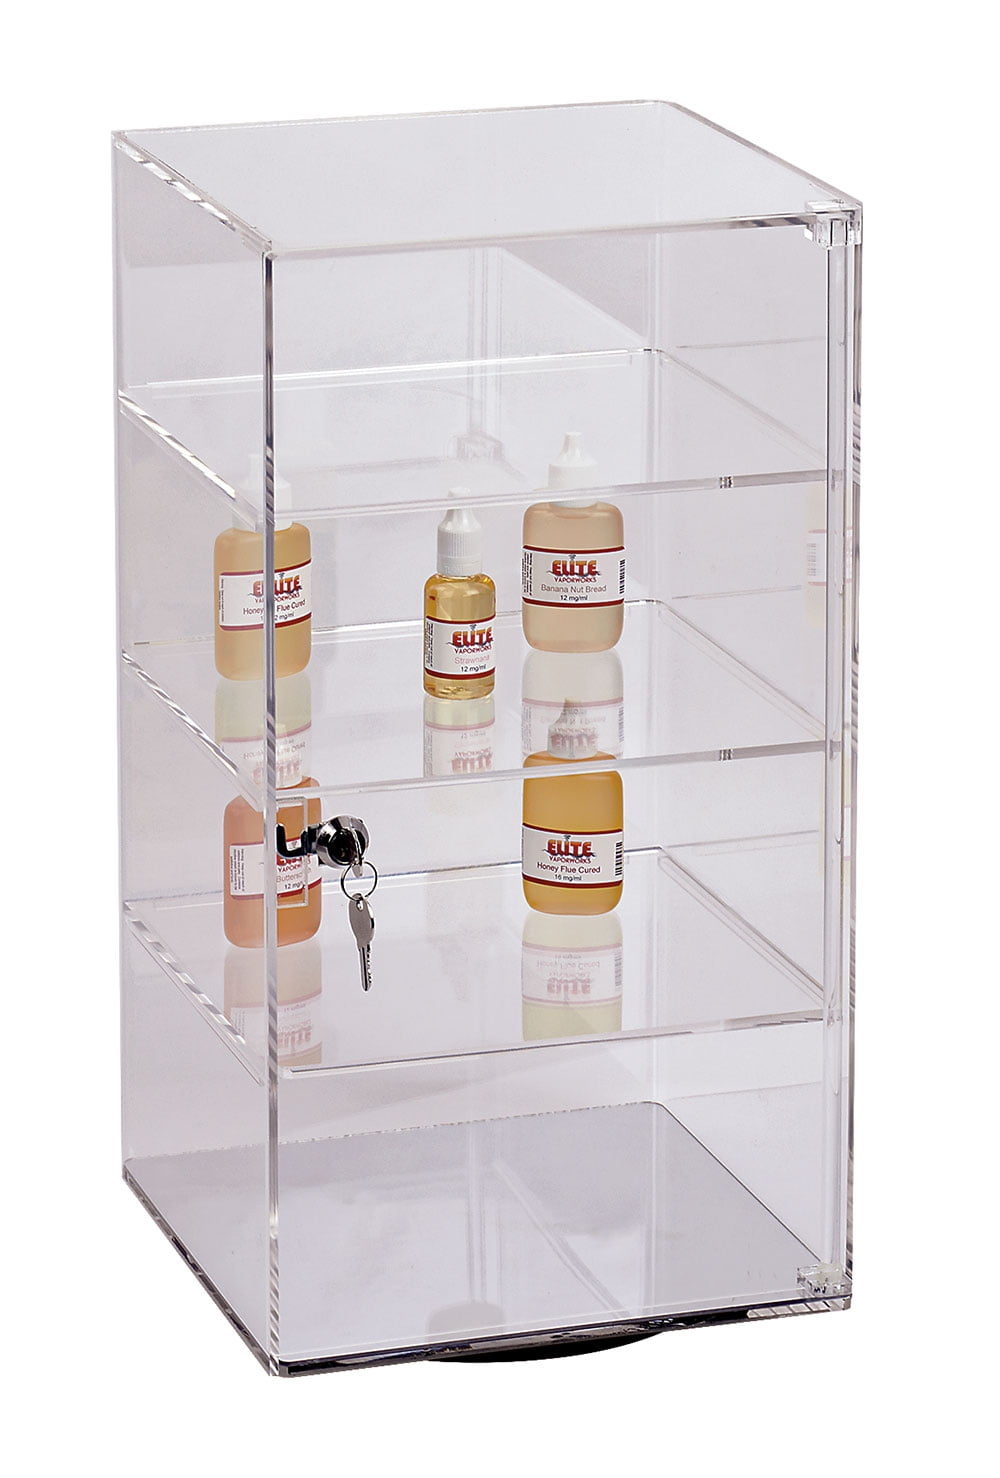 ACRYLIC PERSPEX SMALL DISPLAY CASE 150X100X100 